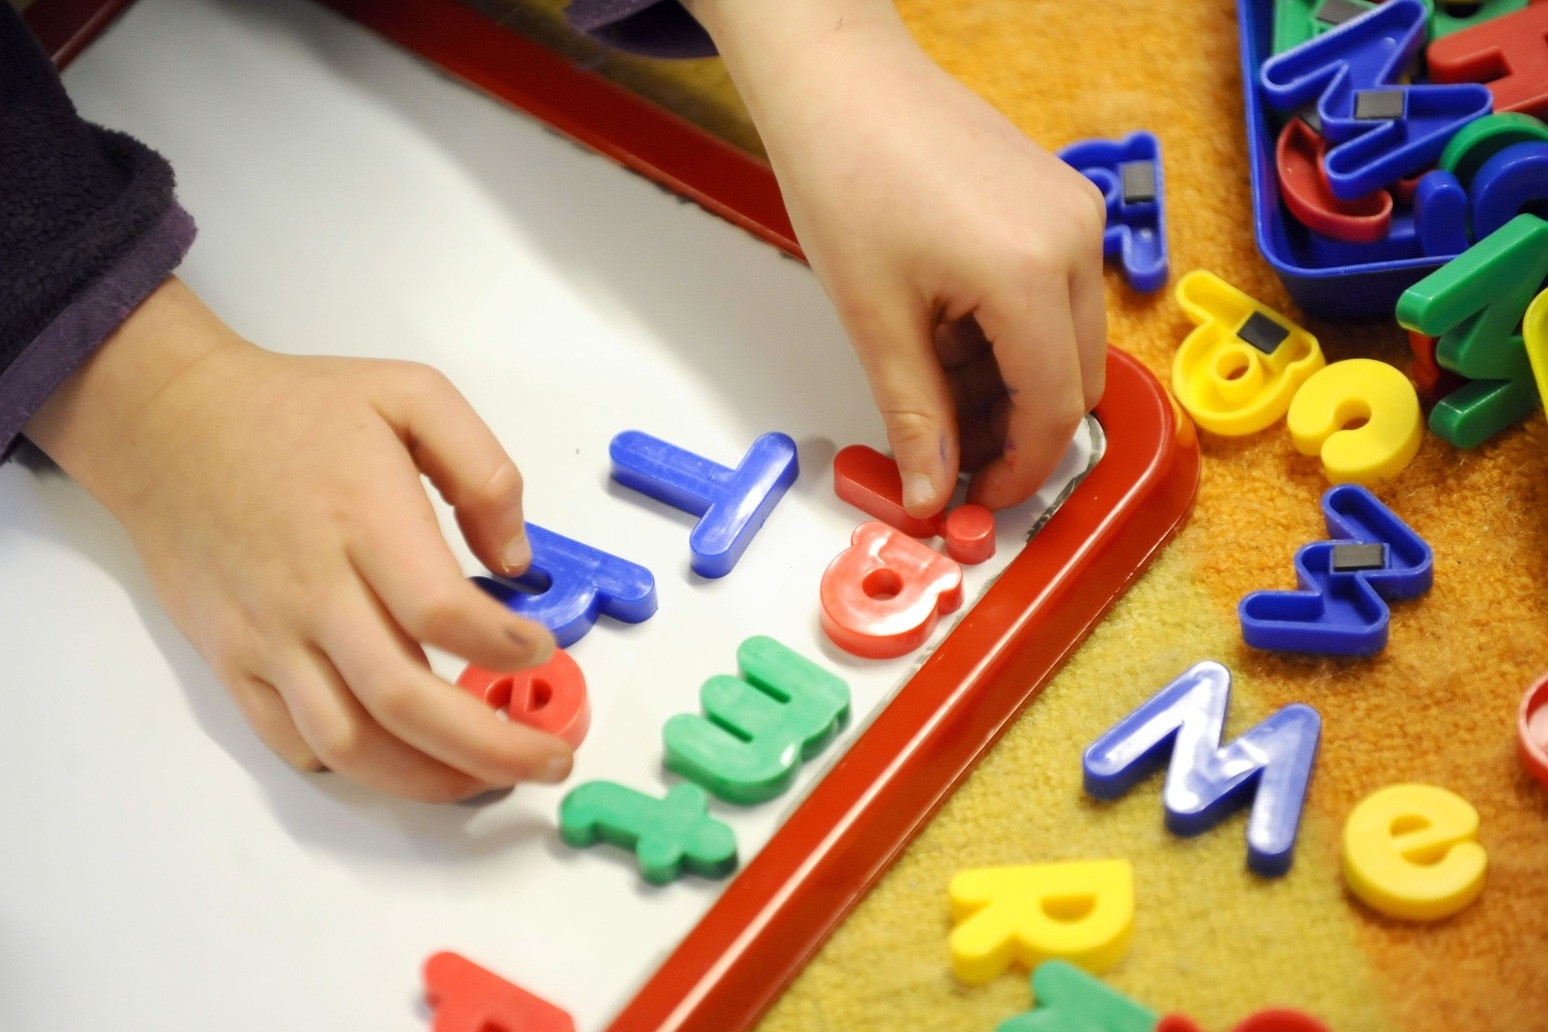 Government package aimed at cutting childcare costs branded ‘pathetic’ 